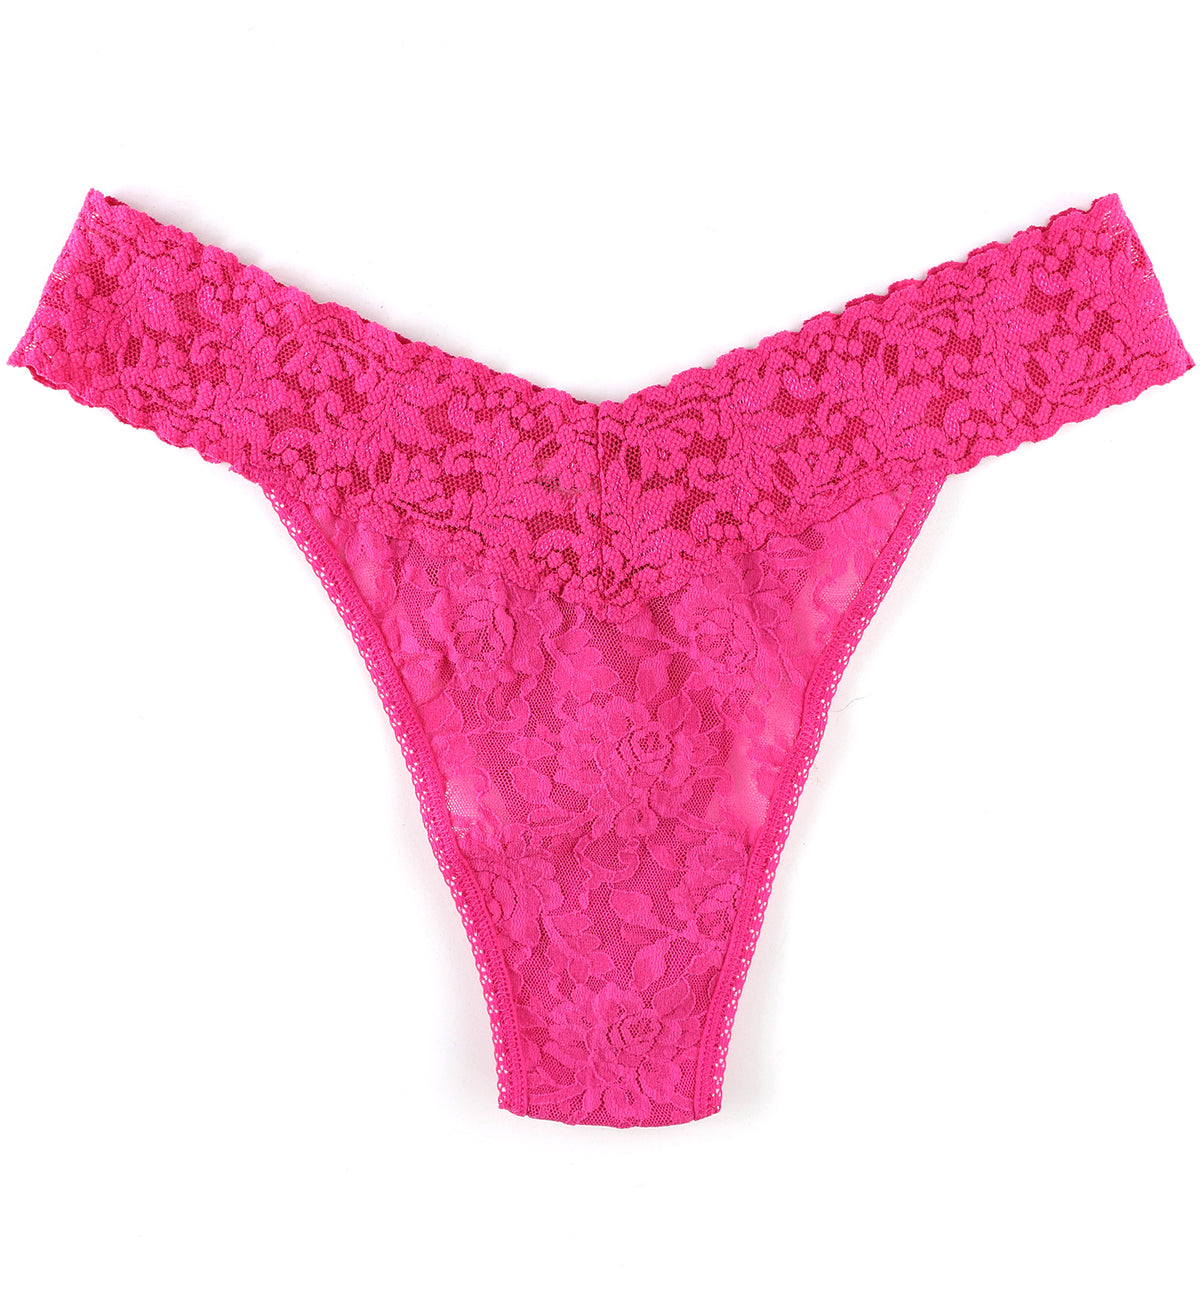 Hanky Panky Signature Lace Original Rise Thong (4811P),Intuition - Intuition,One Size